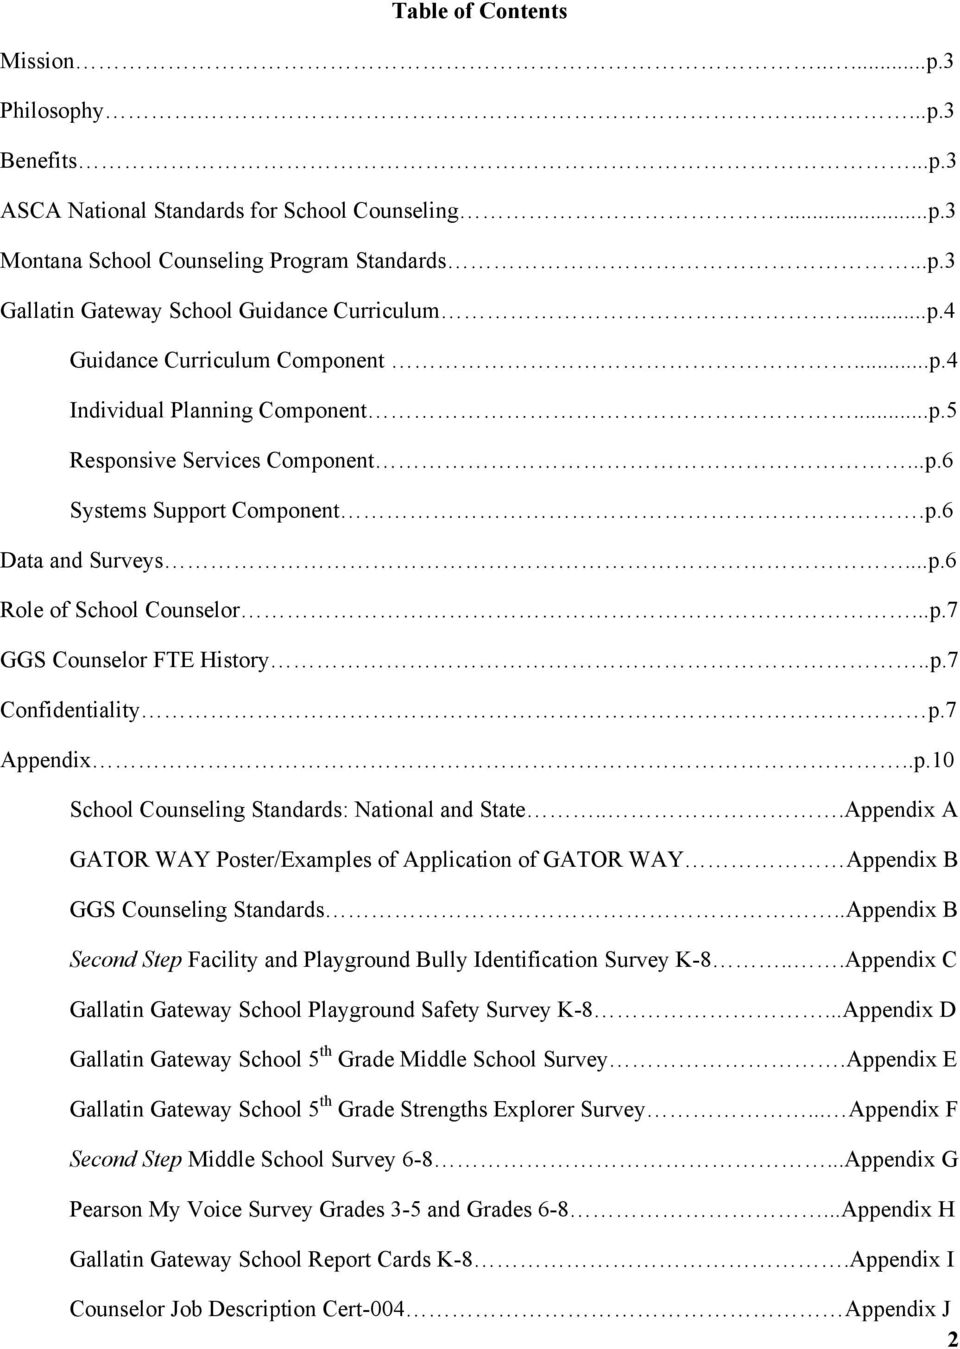 .p.7 Confidentiality p.7 Appendix..p.10 School Counseling Standards: National and State...Appendix A GATOR WAY Poster/Examples of Application of GATOR WAY Appendix B GGS Counseling Standards.